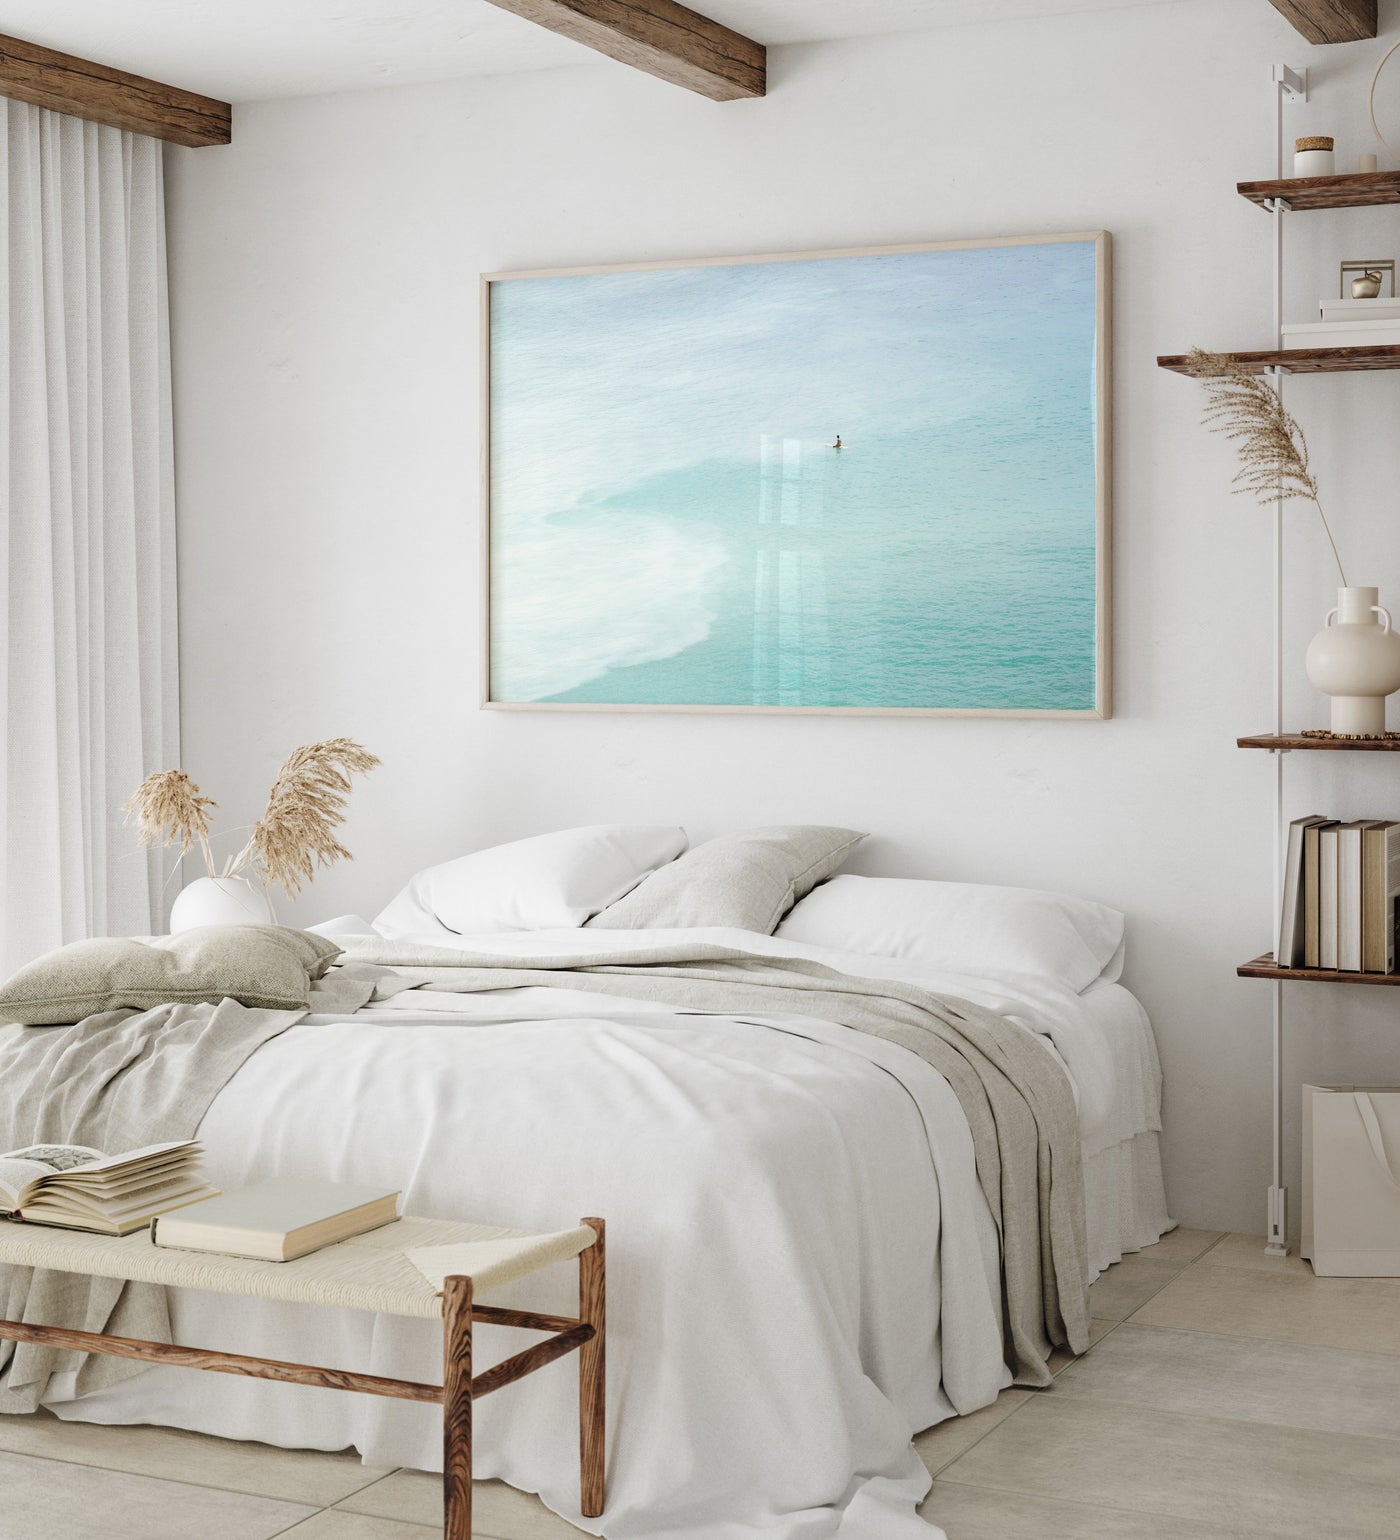 Magoito No 14 - Surfer and turquoise blue ocean fine art print by Cattie Coyle Photography in bedroom